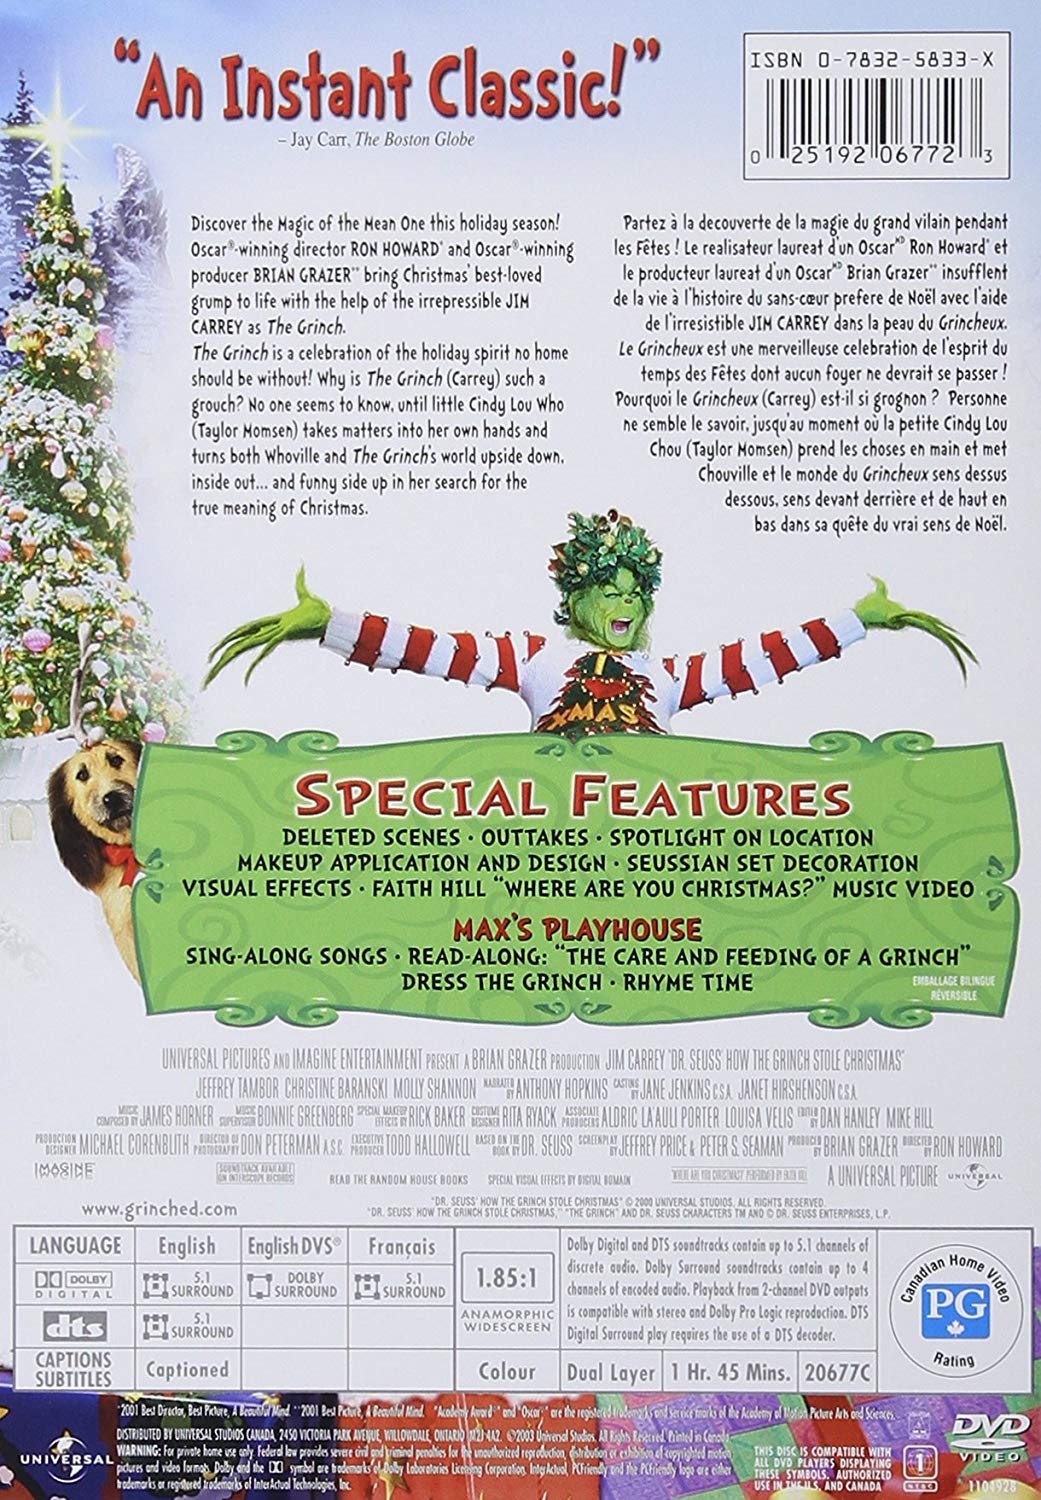 How the Grinch Stole Christmas - image 2 of 2